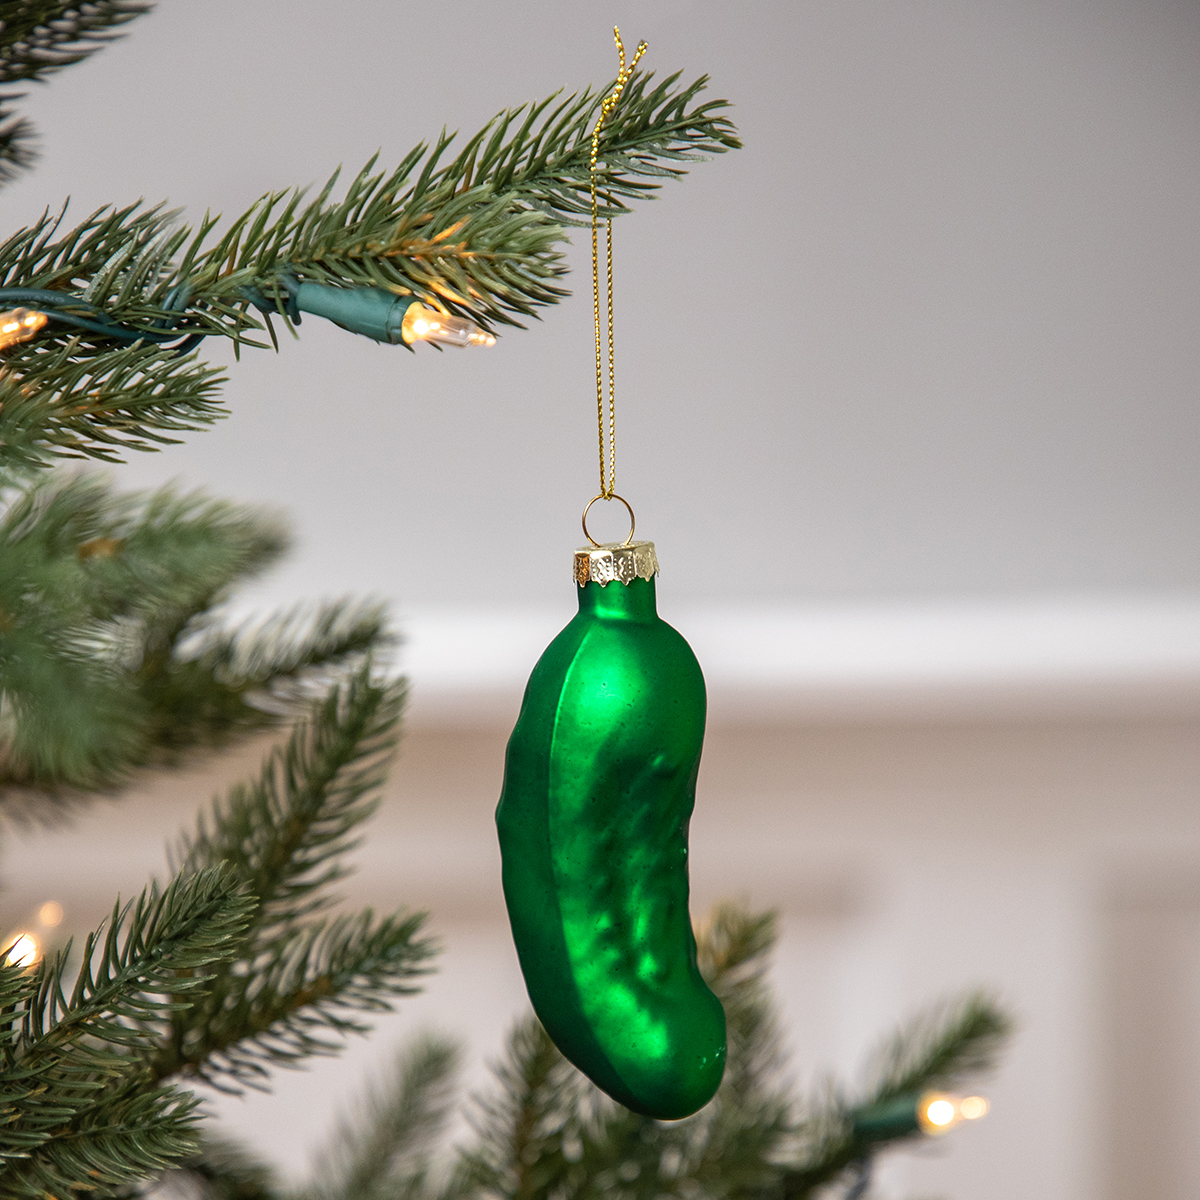 green glass Christmas pickle ornament